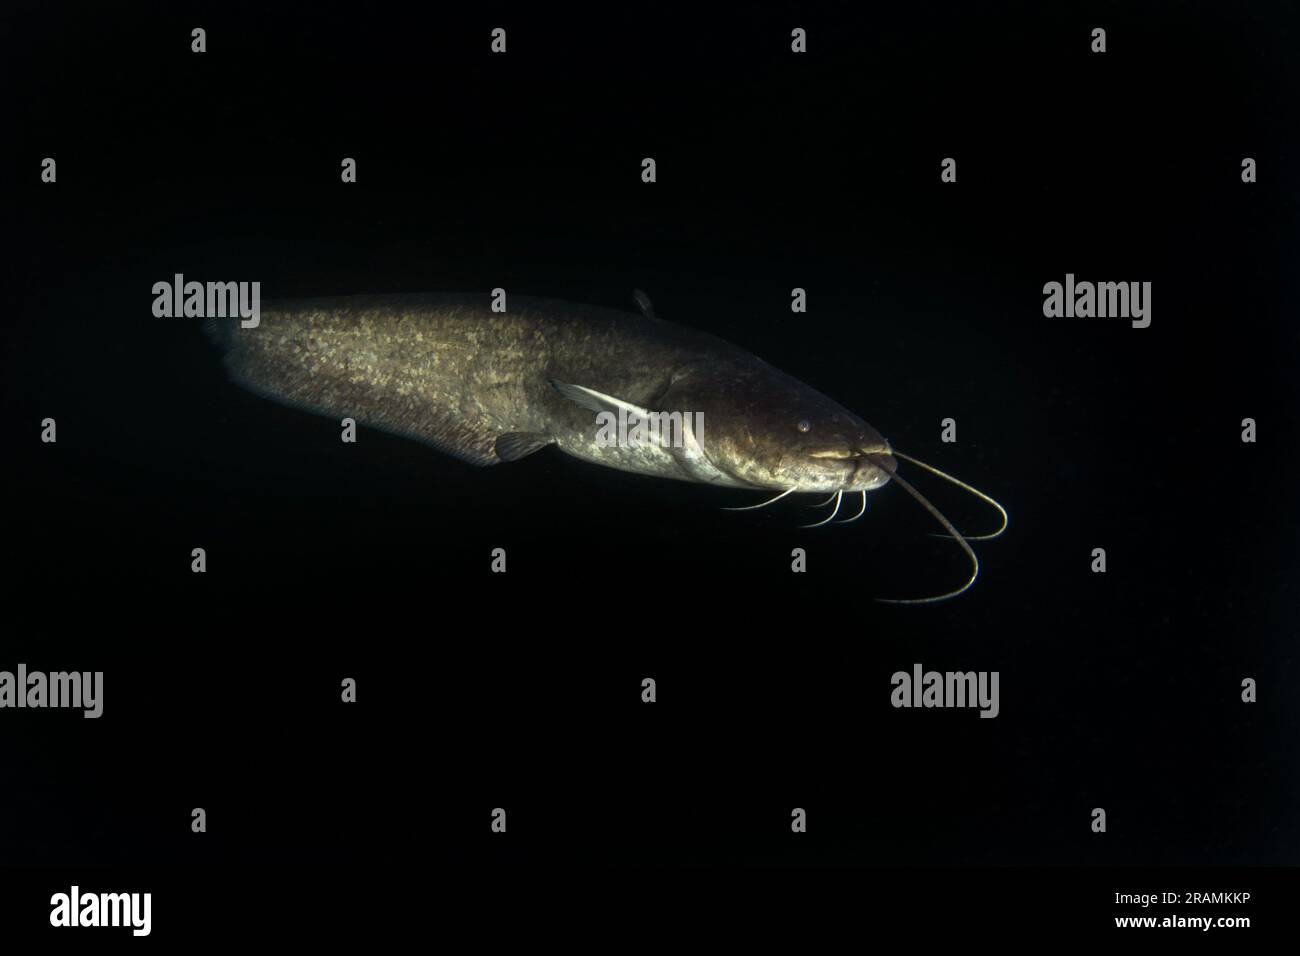 Wels catfish during night dive. Catfish is swimming on the bottom of the lake. European fish in natural habitat. Huge fish with long barbels. Stock Photo